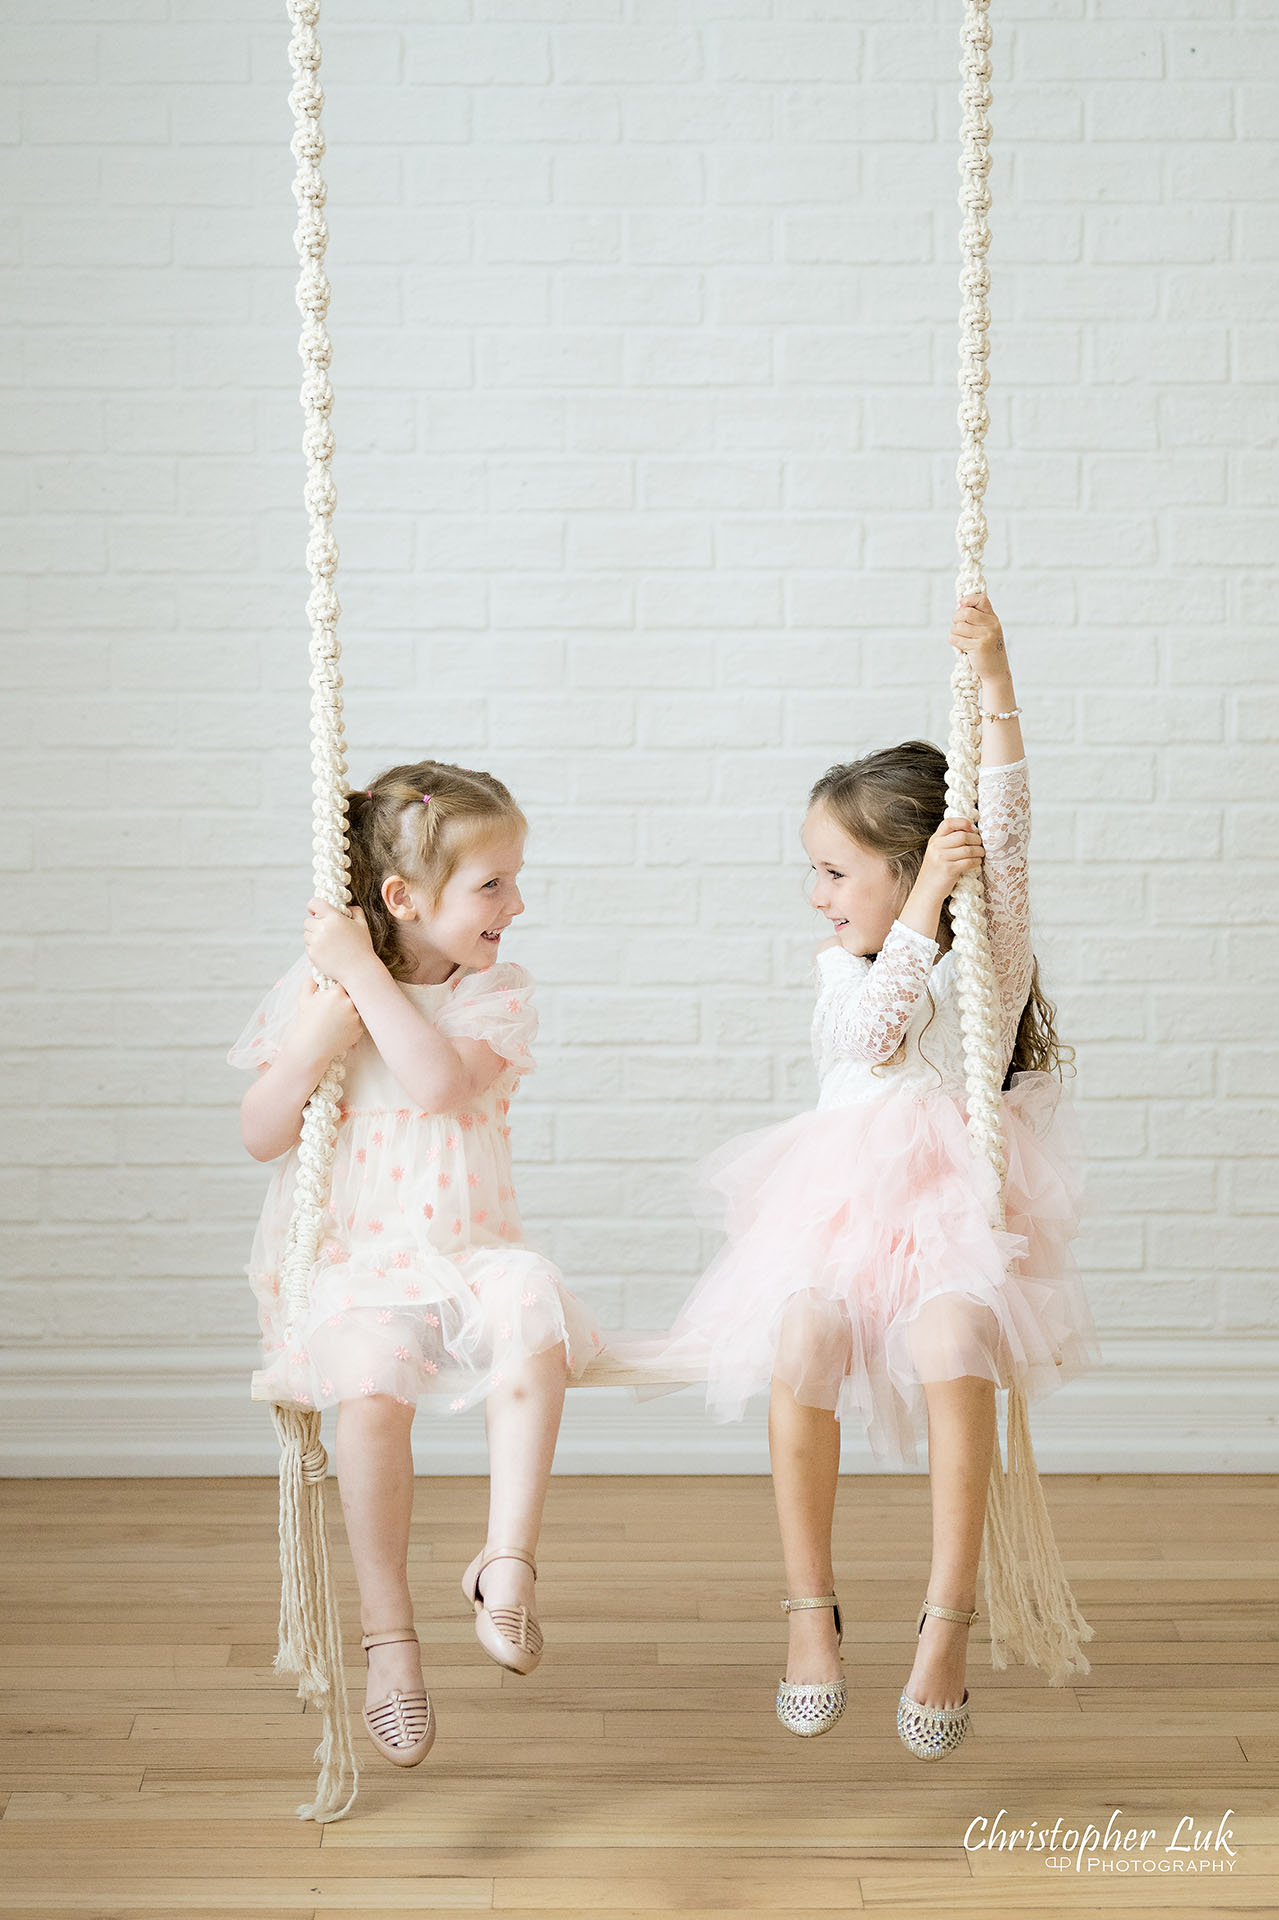 Cousins Sisters Daughters Girls White Pink Dresses Playing on Macrame Swing Portrait